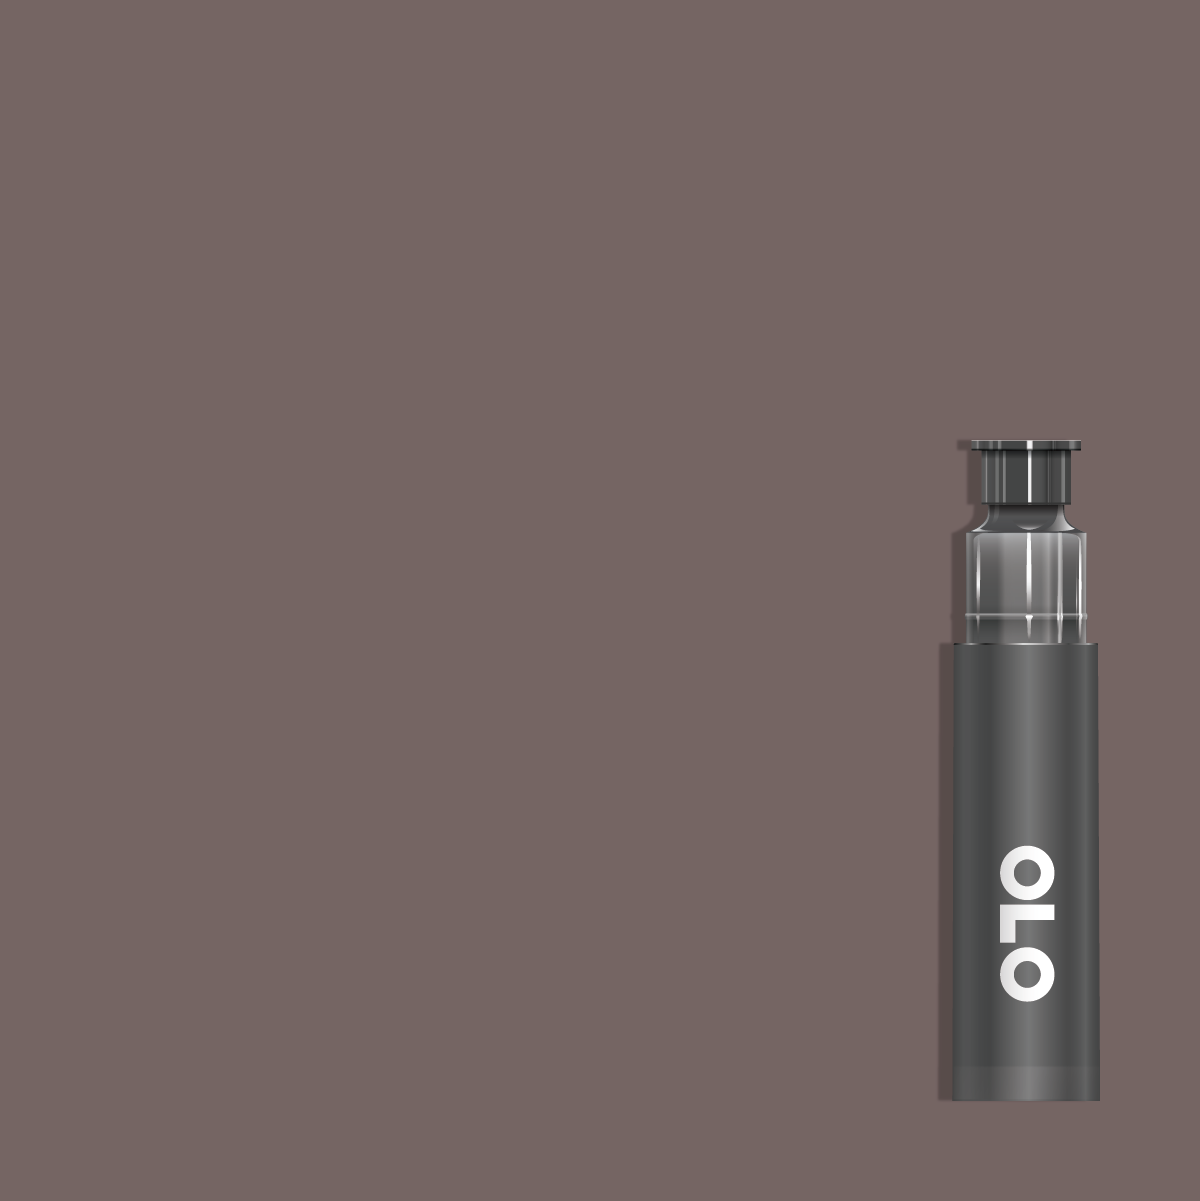 OLO RG5 Red Gray 5 Replacement Cartridge